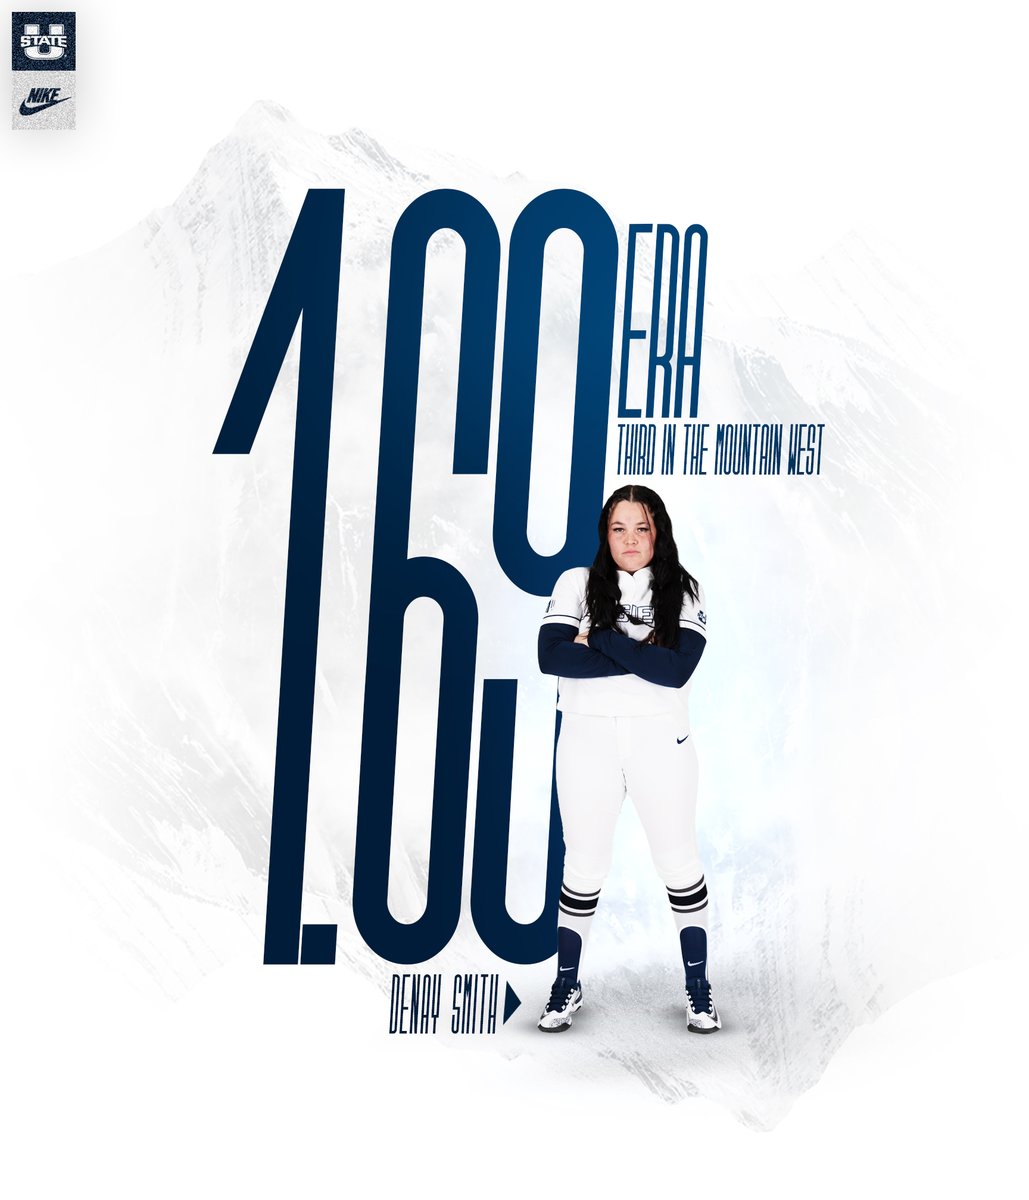 𝘾𝙤𝙤𝙠𝙞𝙣𝙜 𝙬𝙞𝙩𝙝 𝙂𝘼𝙎 🔥🔥🔥 Jessica Stewart leads the @MountainWest with a 1.48 ERA, while Denay Smith ranks third in the conference with a 1.69 ERA! #AggiesAllTheWay